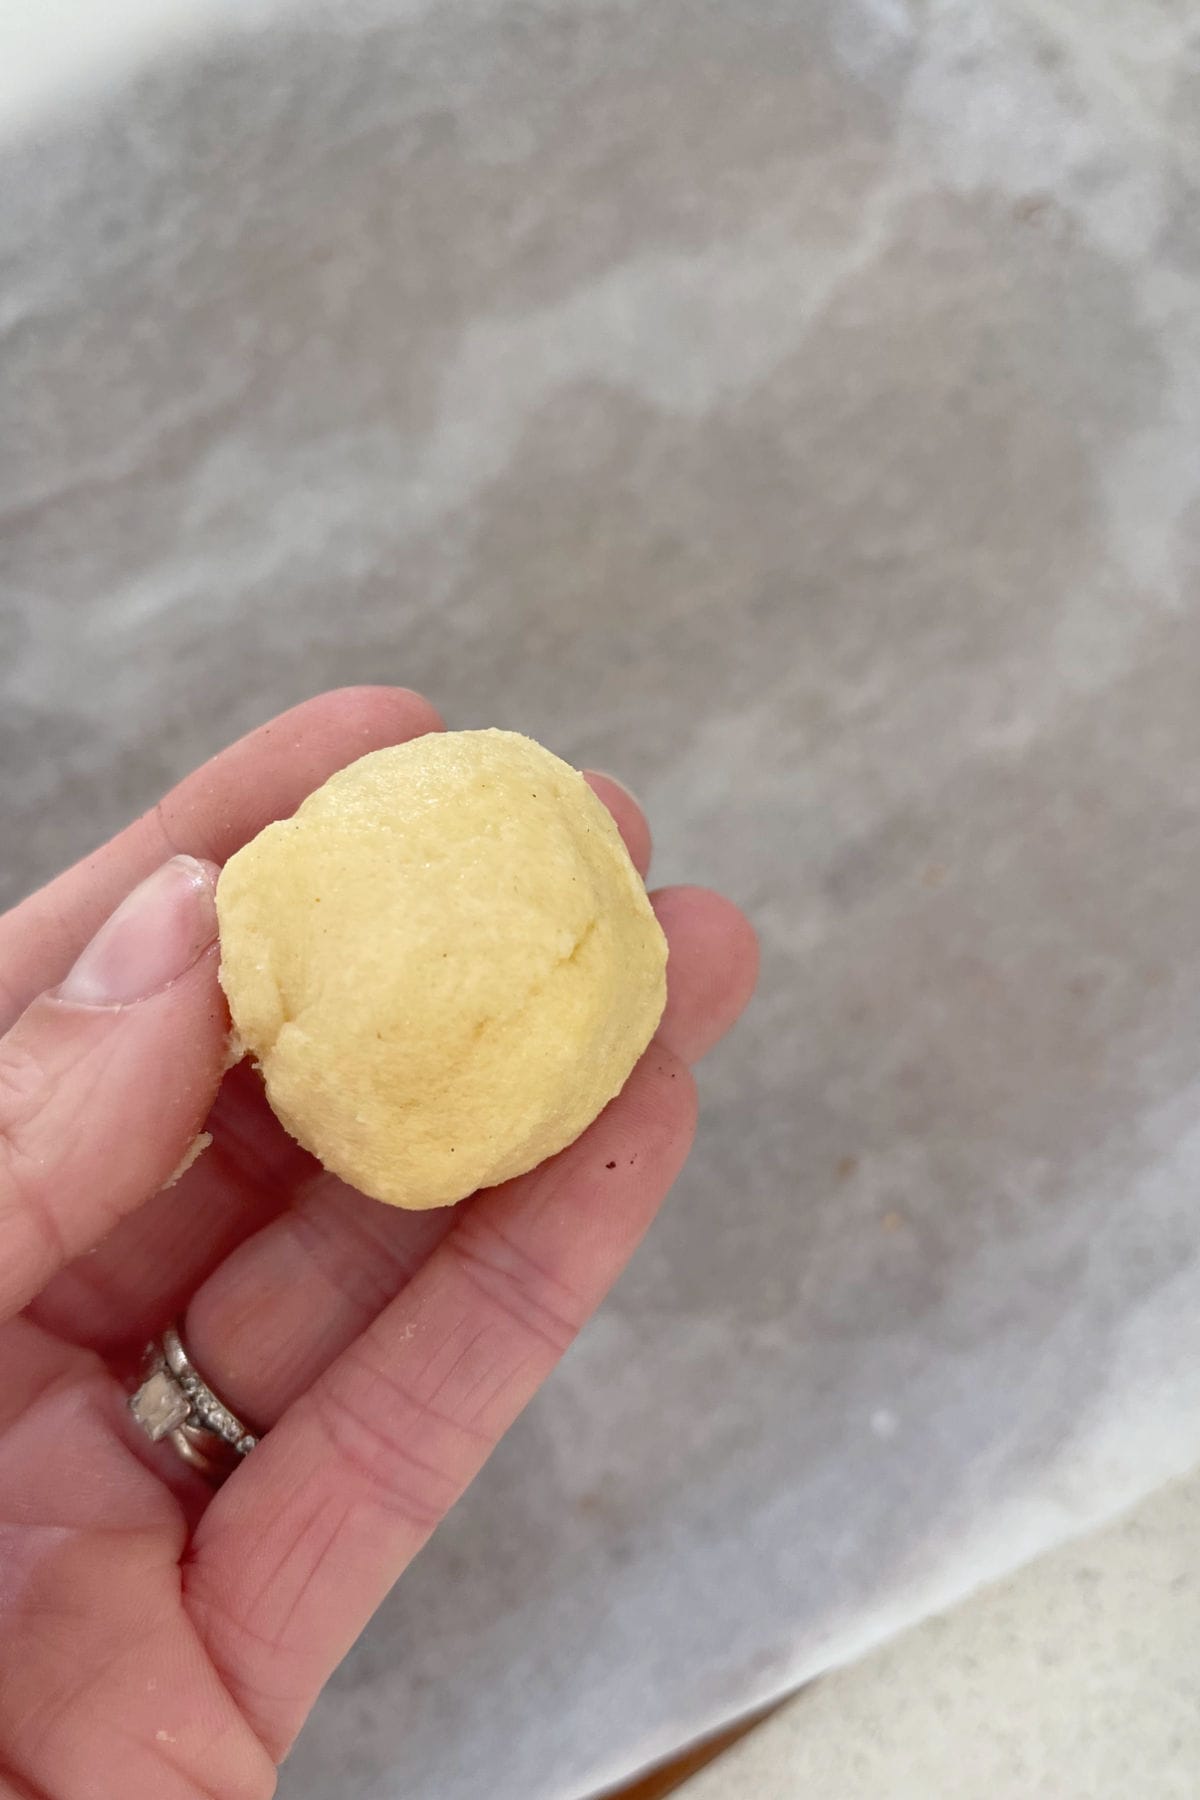 Adult holding ball of Christmas Biscuit dough.